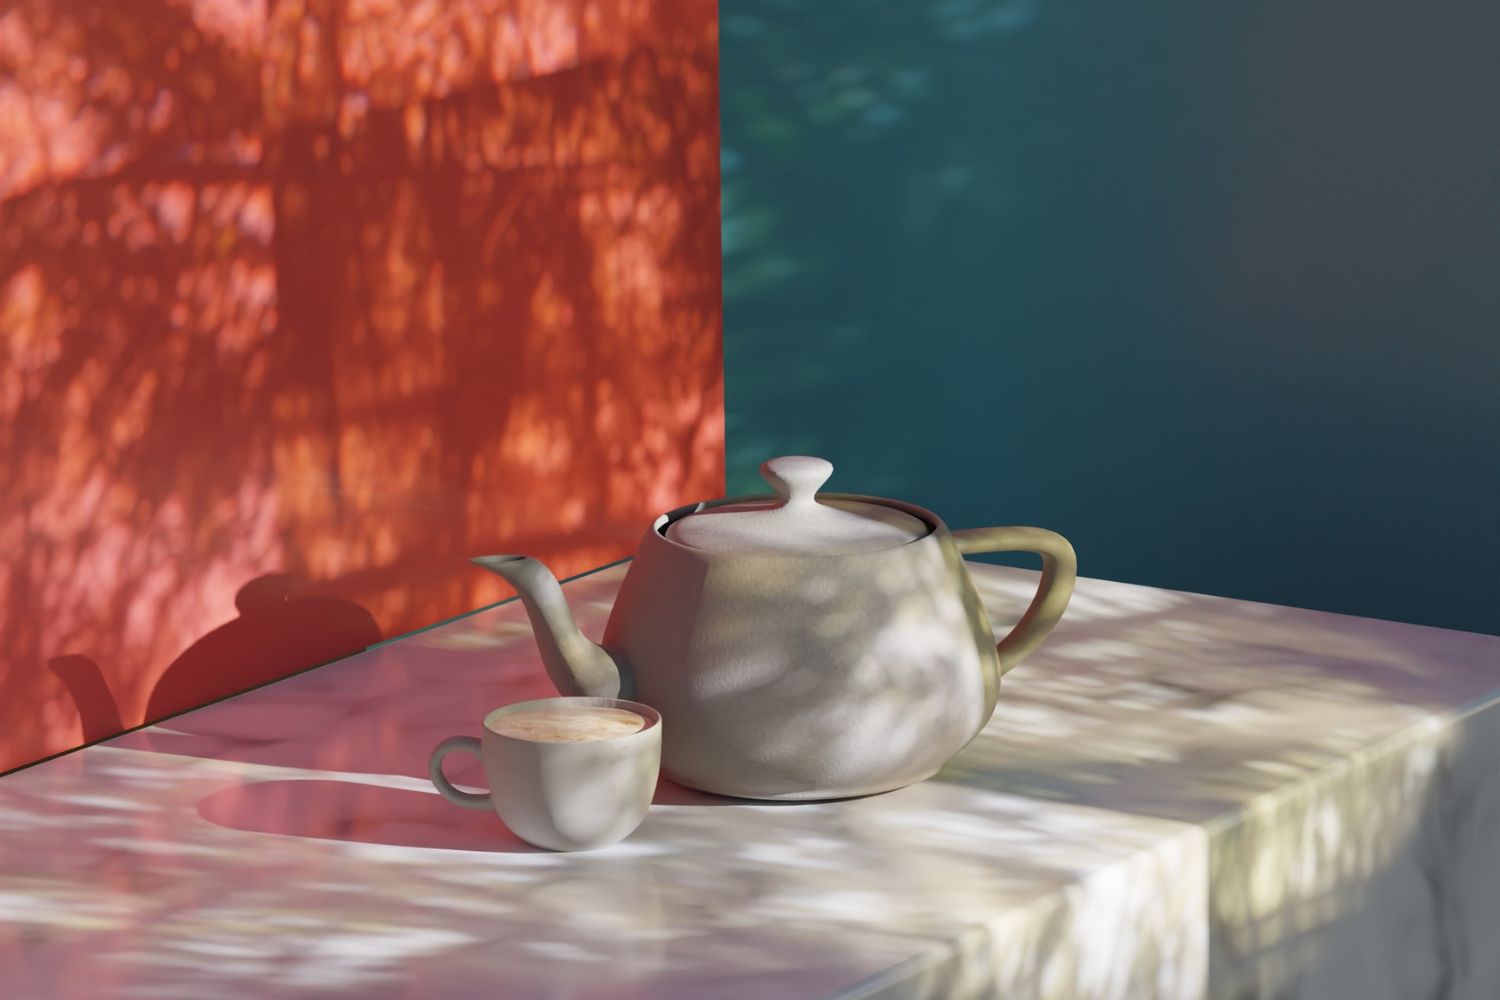 beautiful kettle and cup on table top Photo by Anugrah j on Unsplash